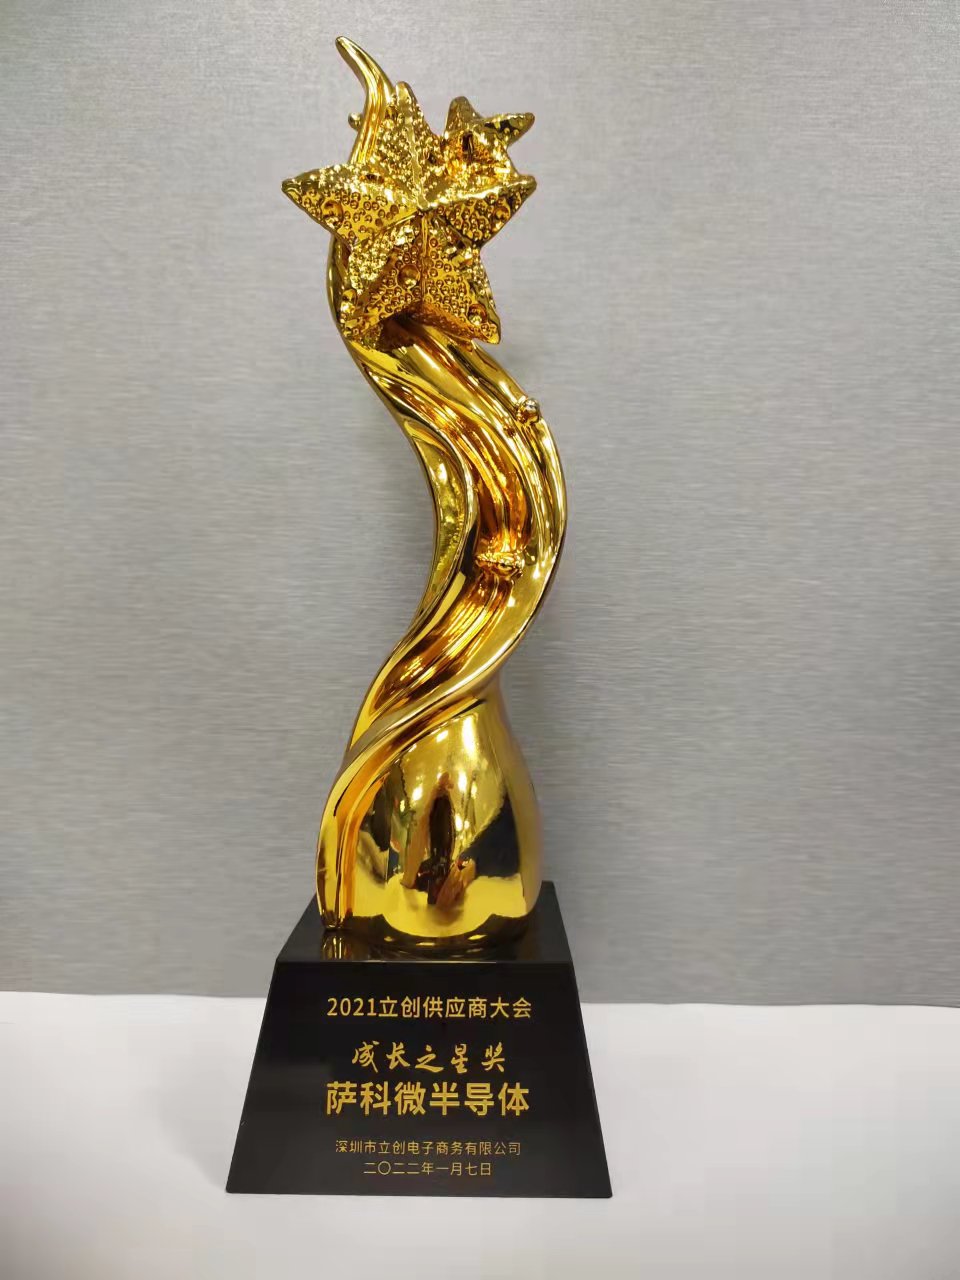 The "Growing Star Award" of 2021  Lichuang's Supplier Conference